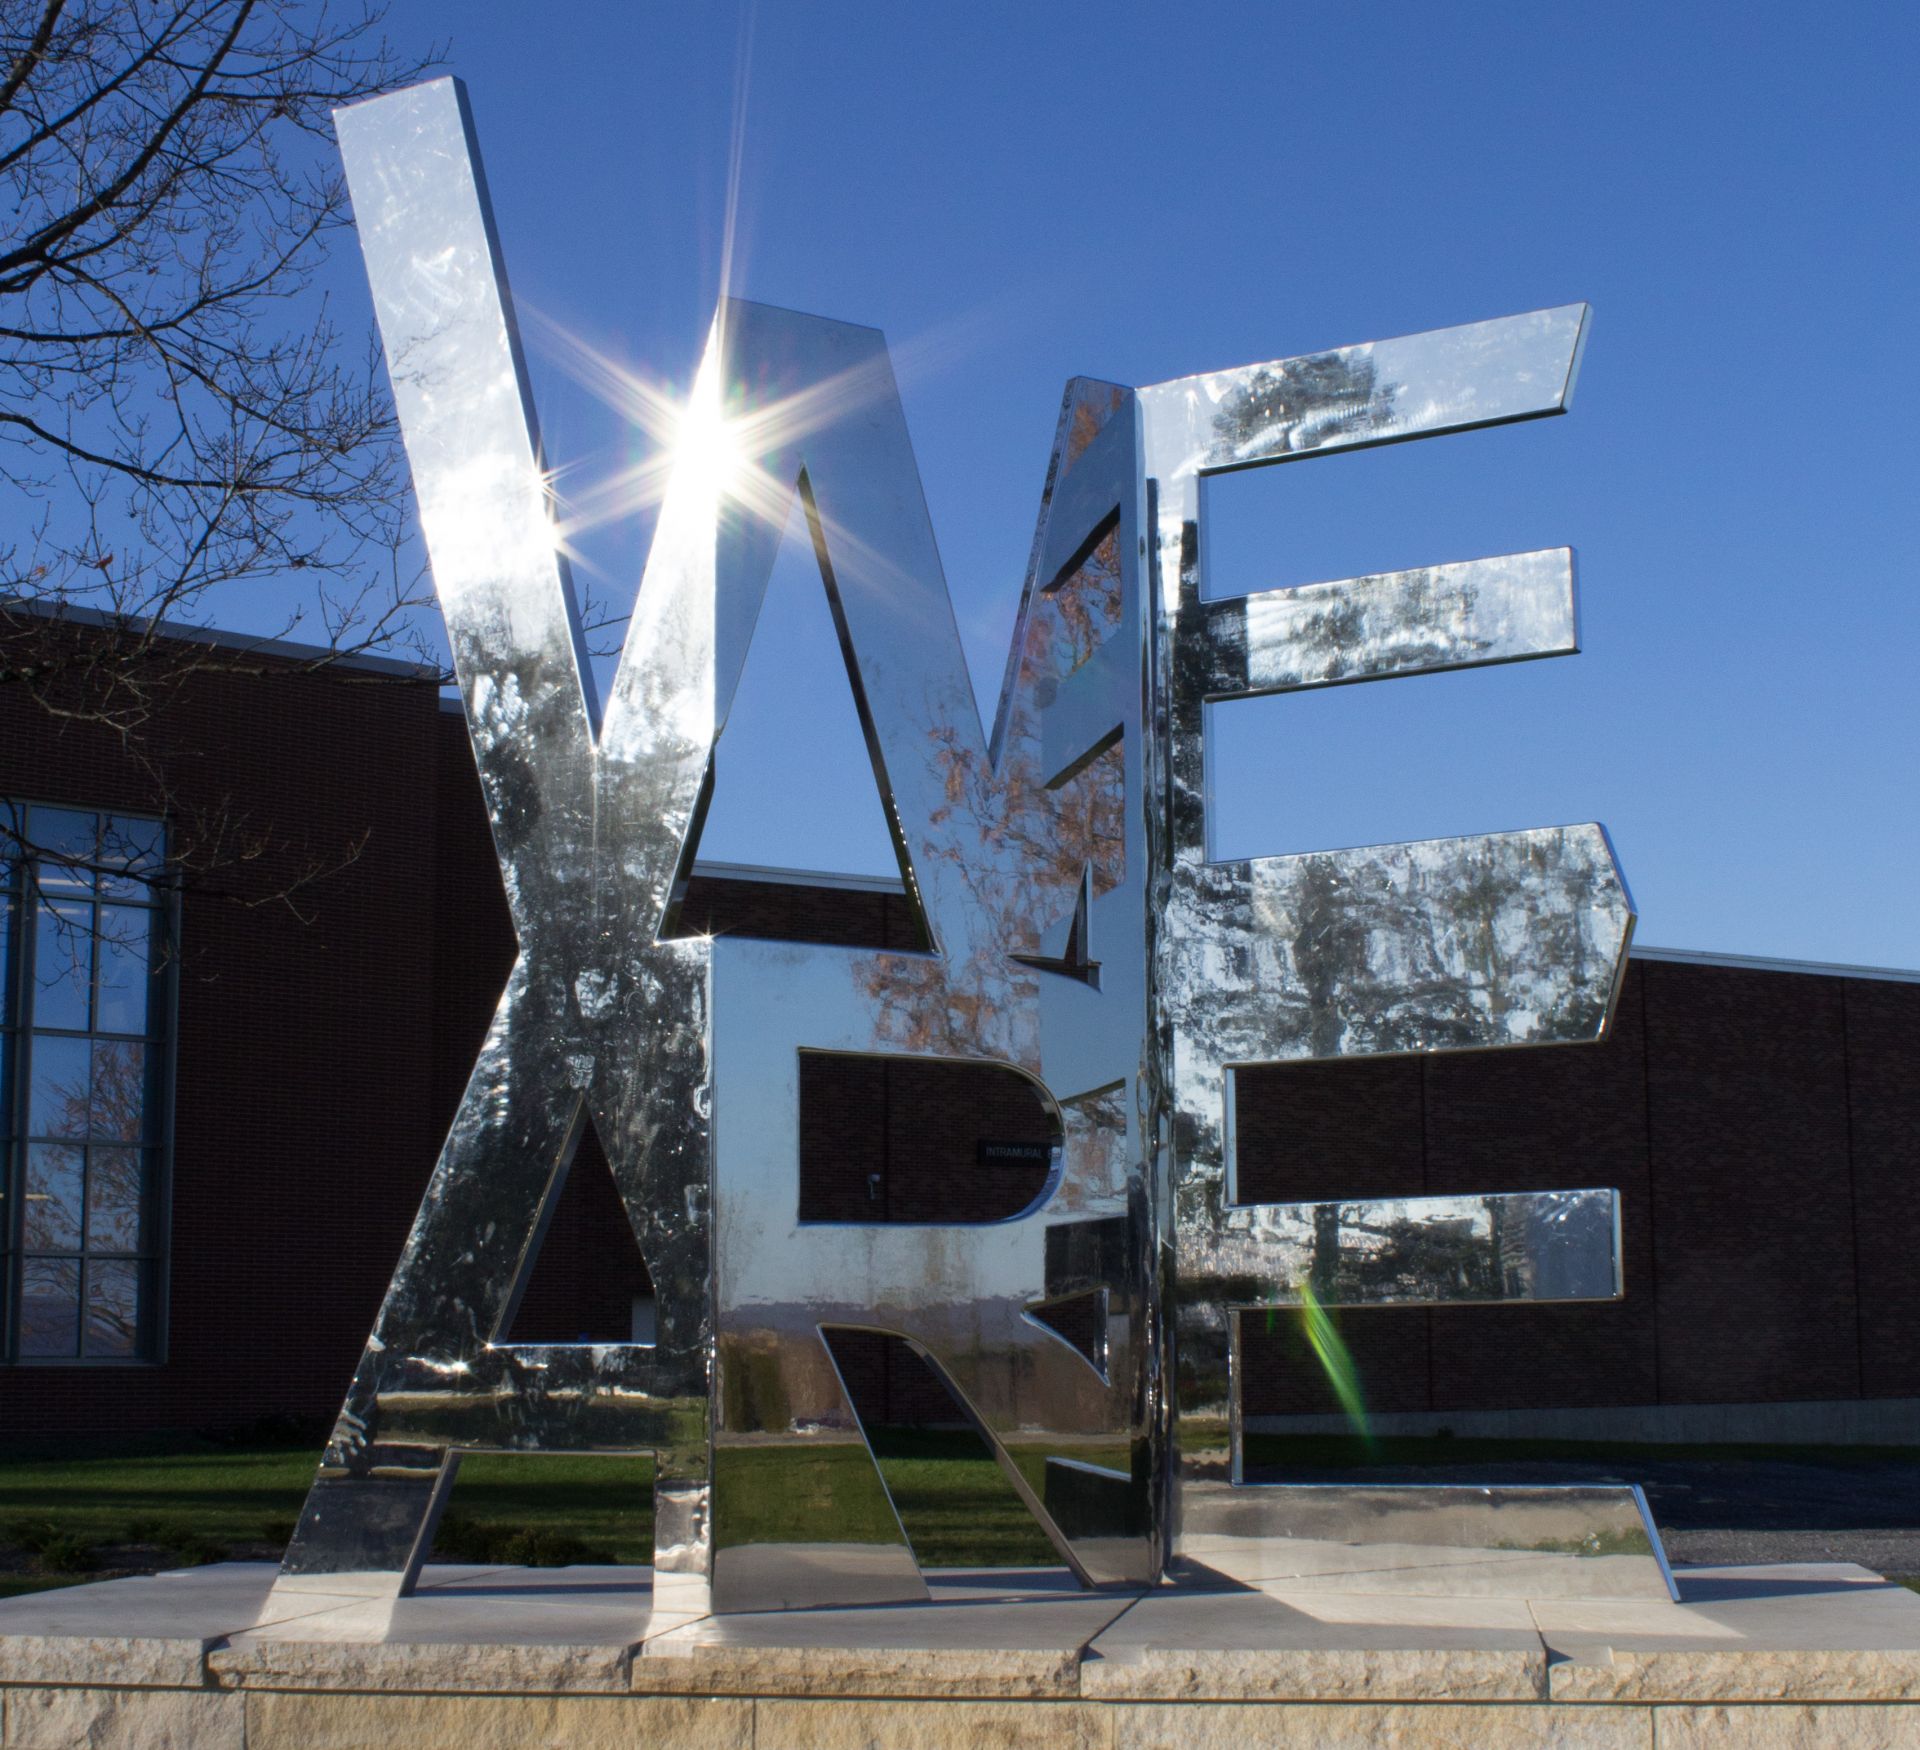 The mirror-finished metallic "We Are" sculpture shining in the sun against a brilliant blue sky background.